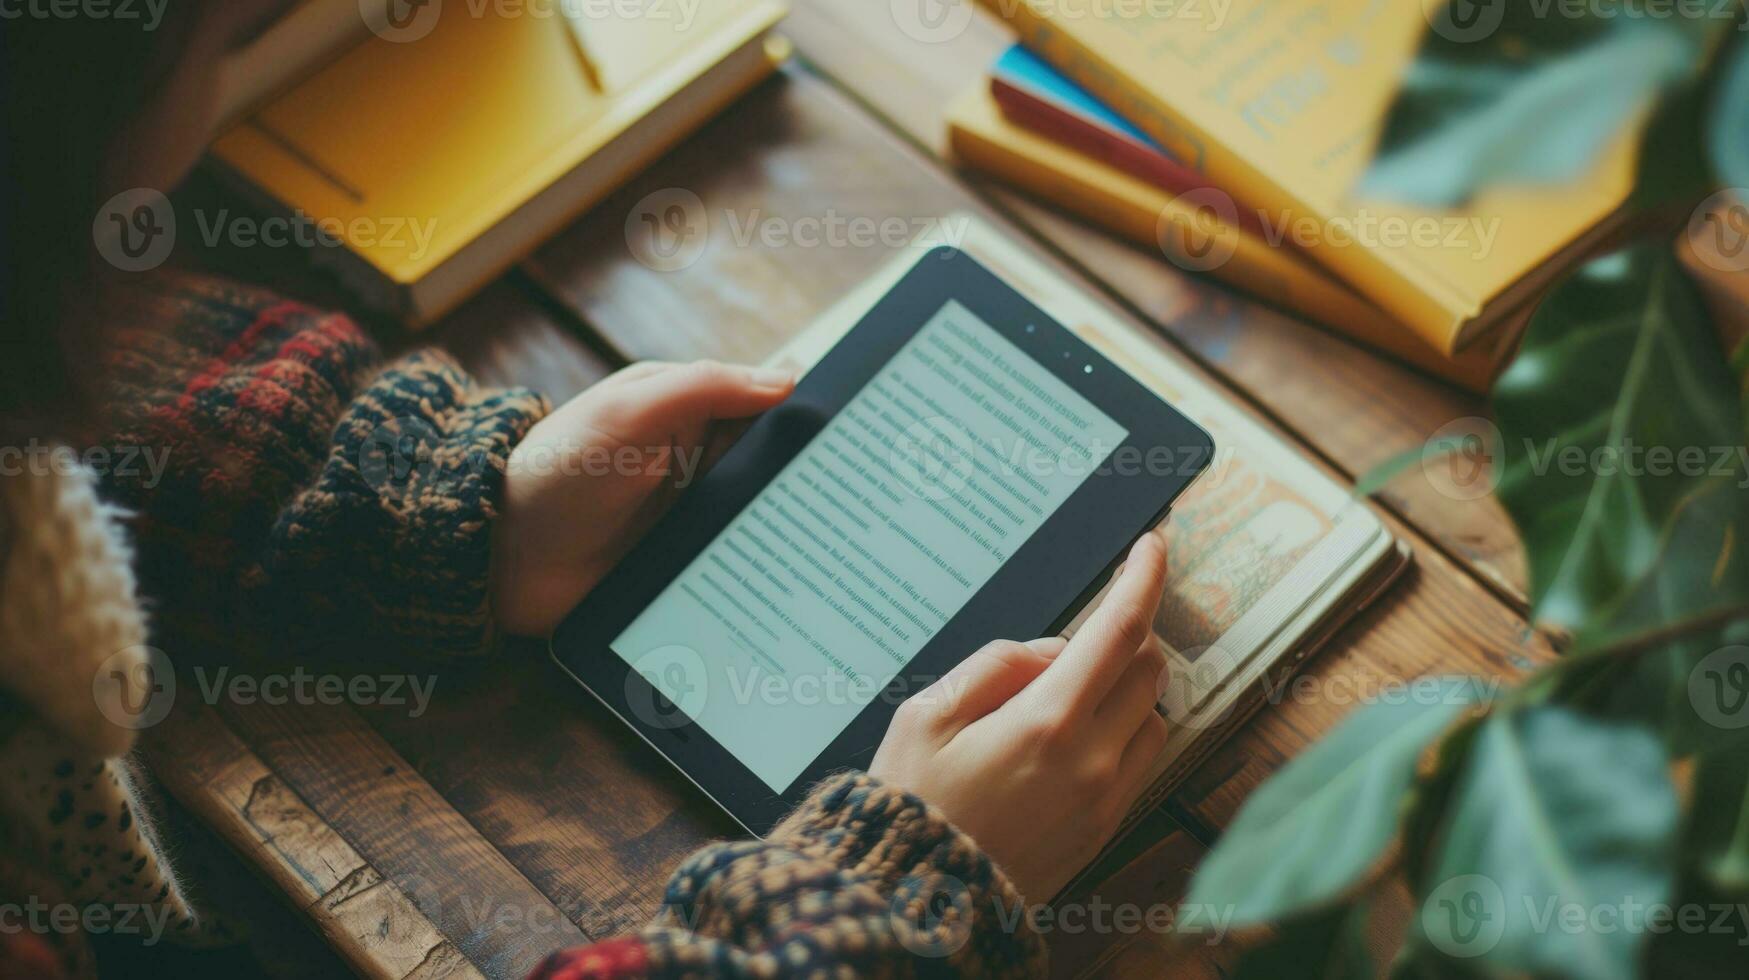 AI generated Close-up of hands holding a tablet displaying text, with books around photo